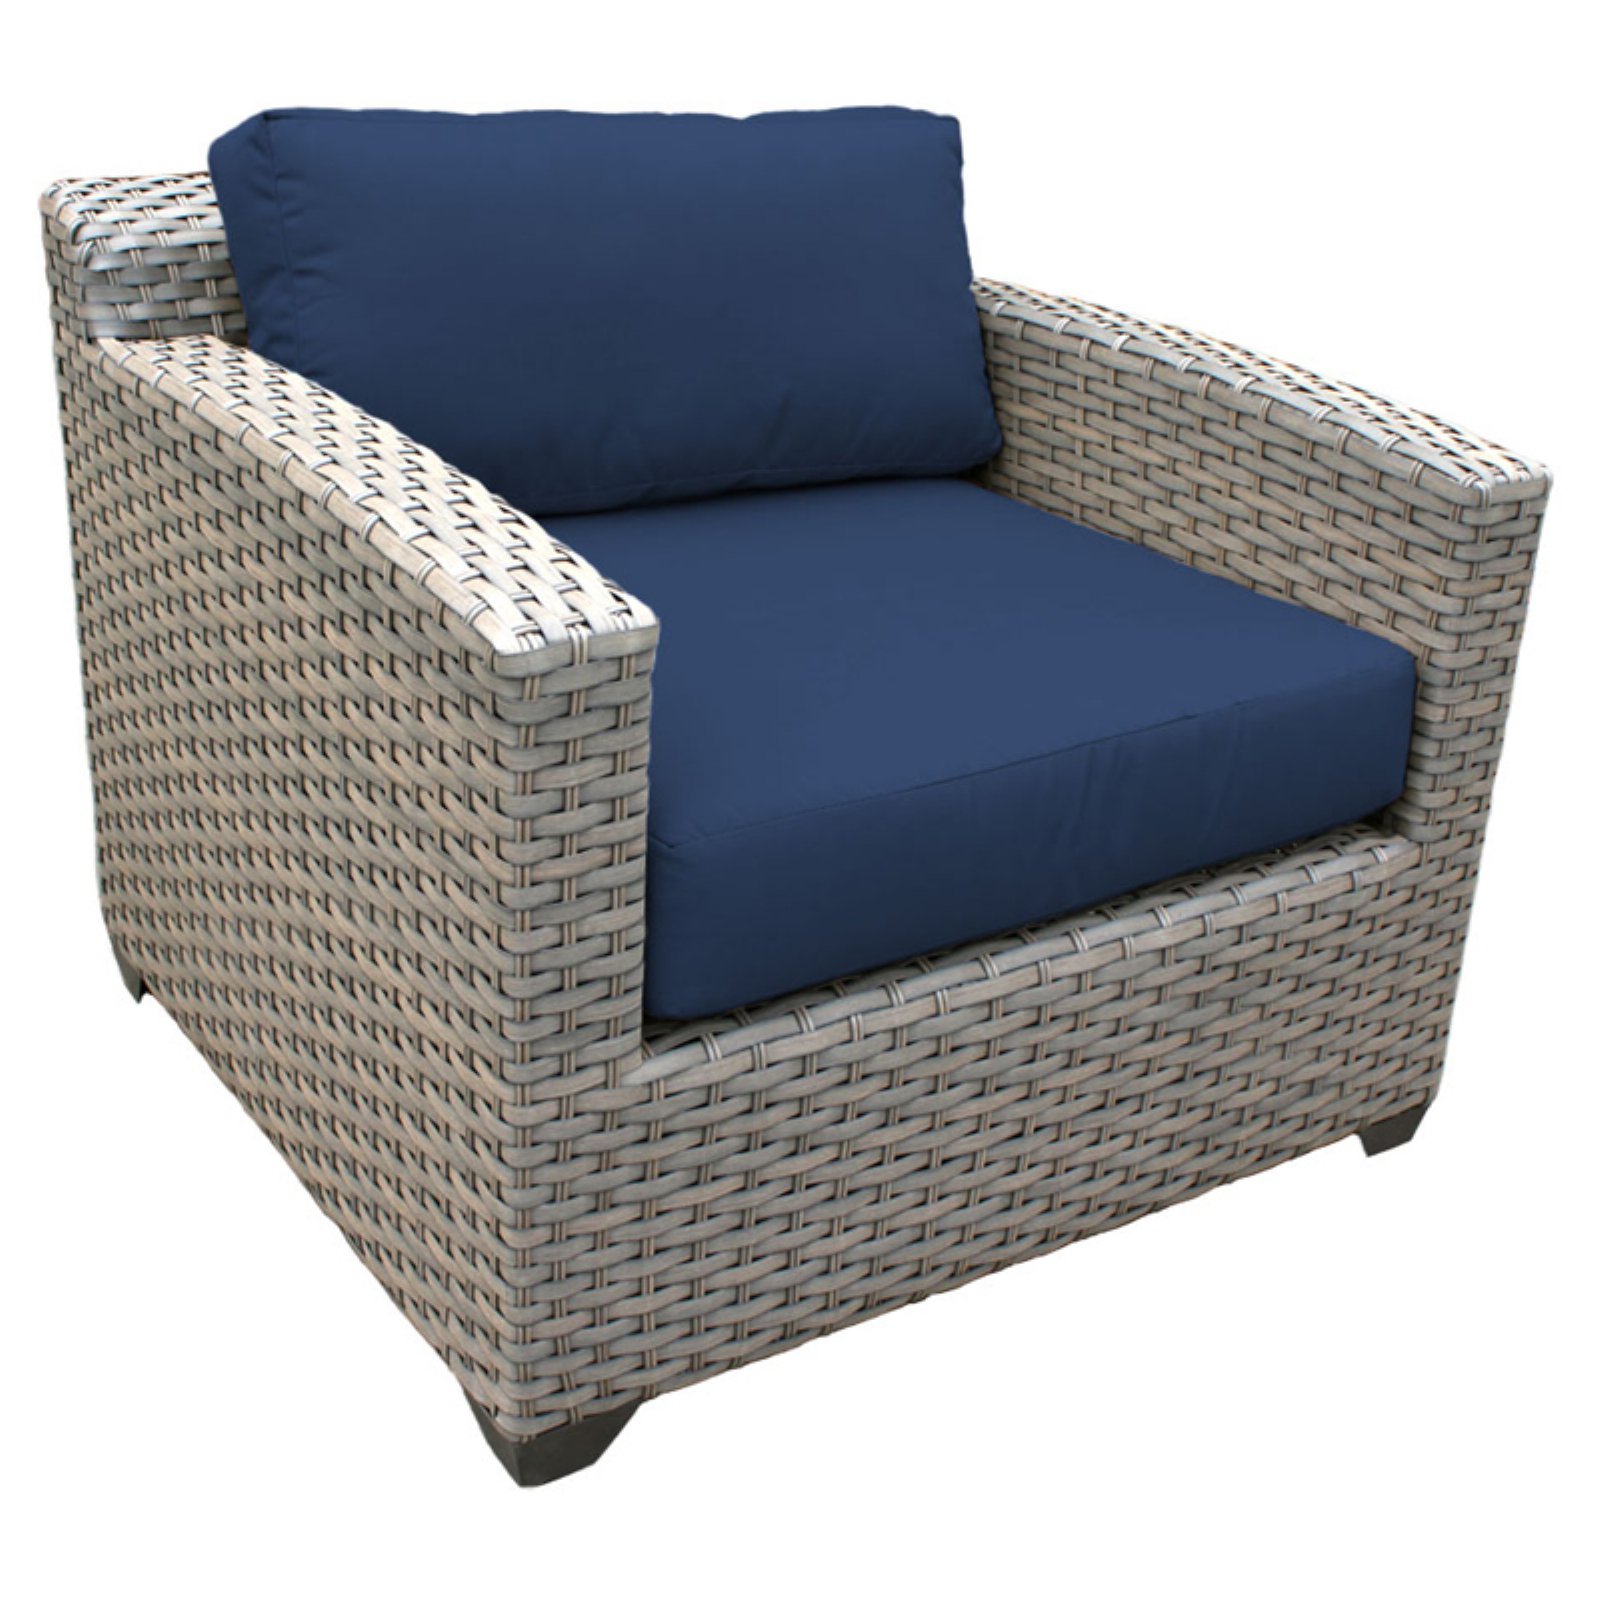 TK Classics Florence Wicker Outdoor Club Chair - Set of 2 Cushion Covers - image 2 of 2